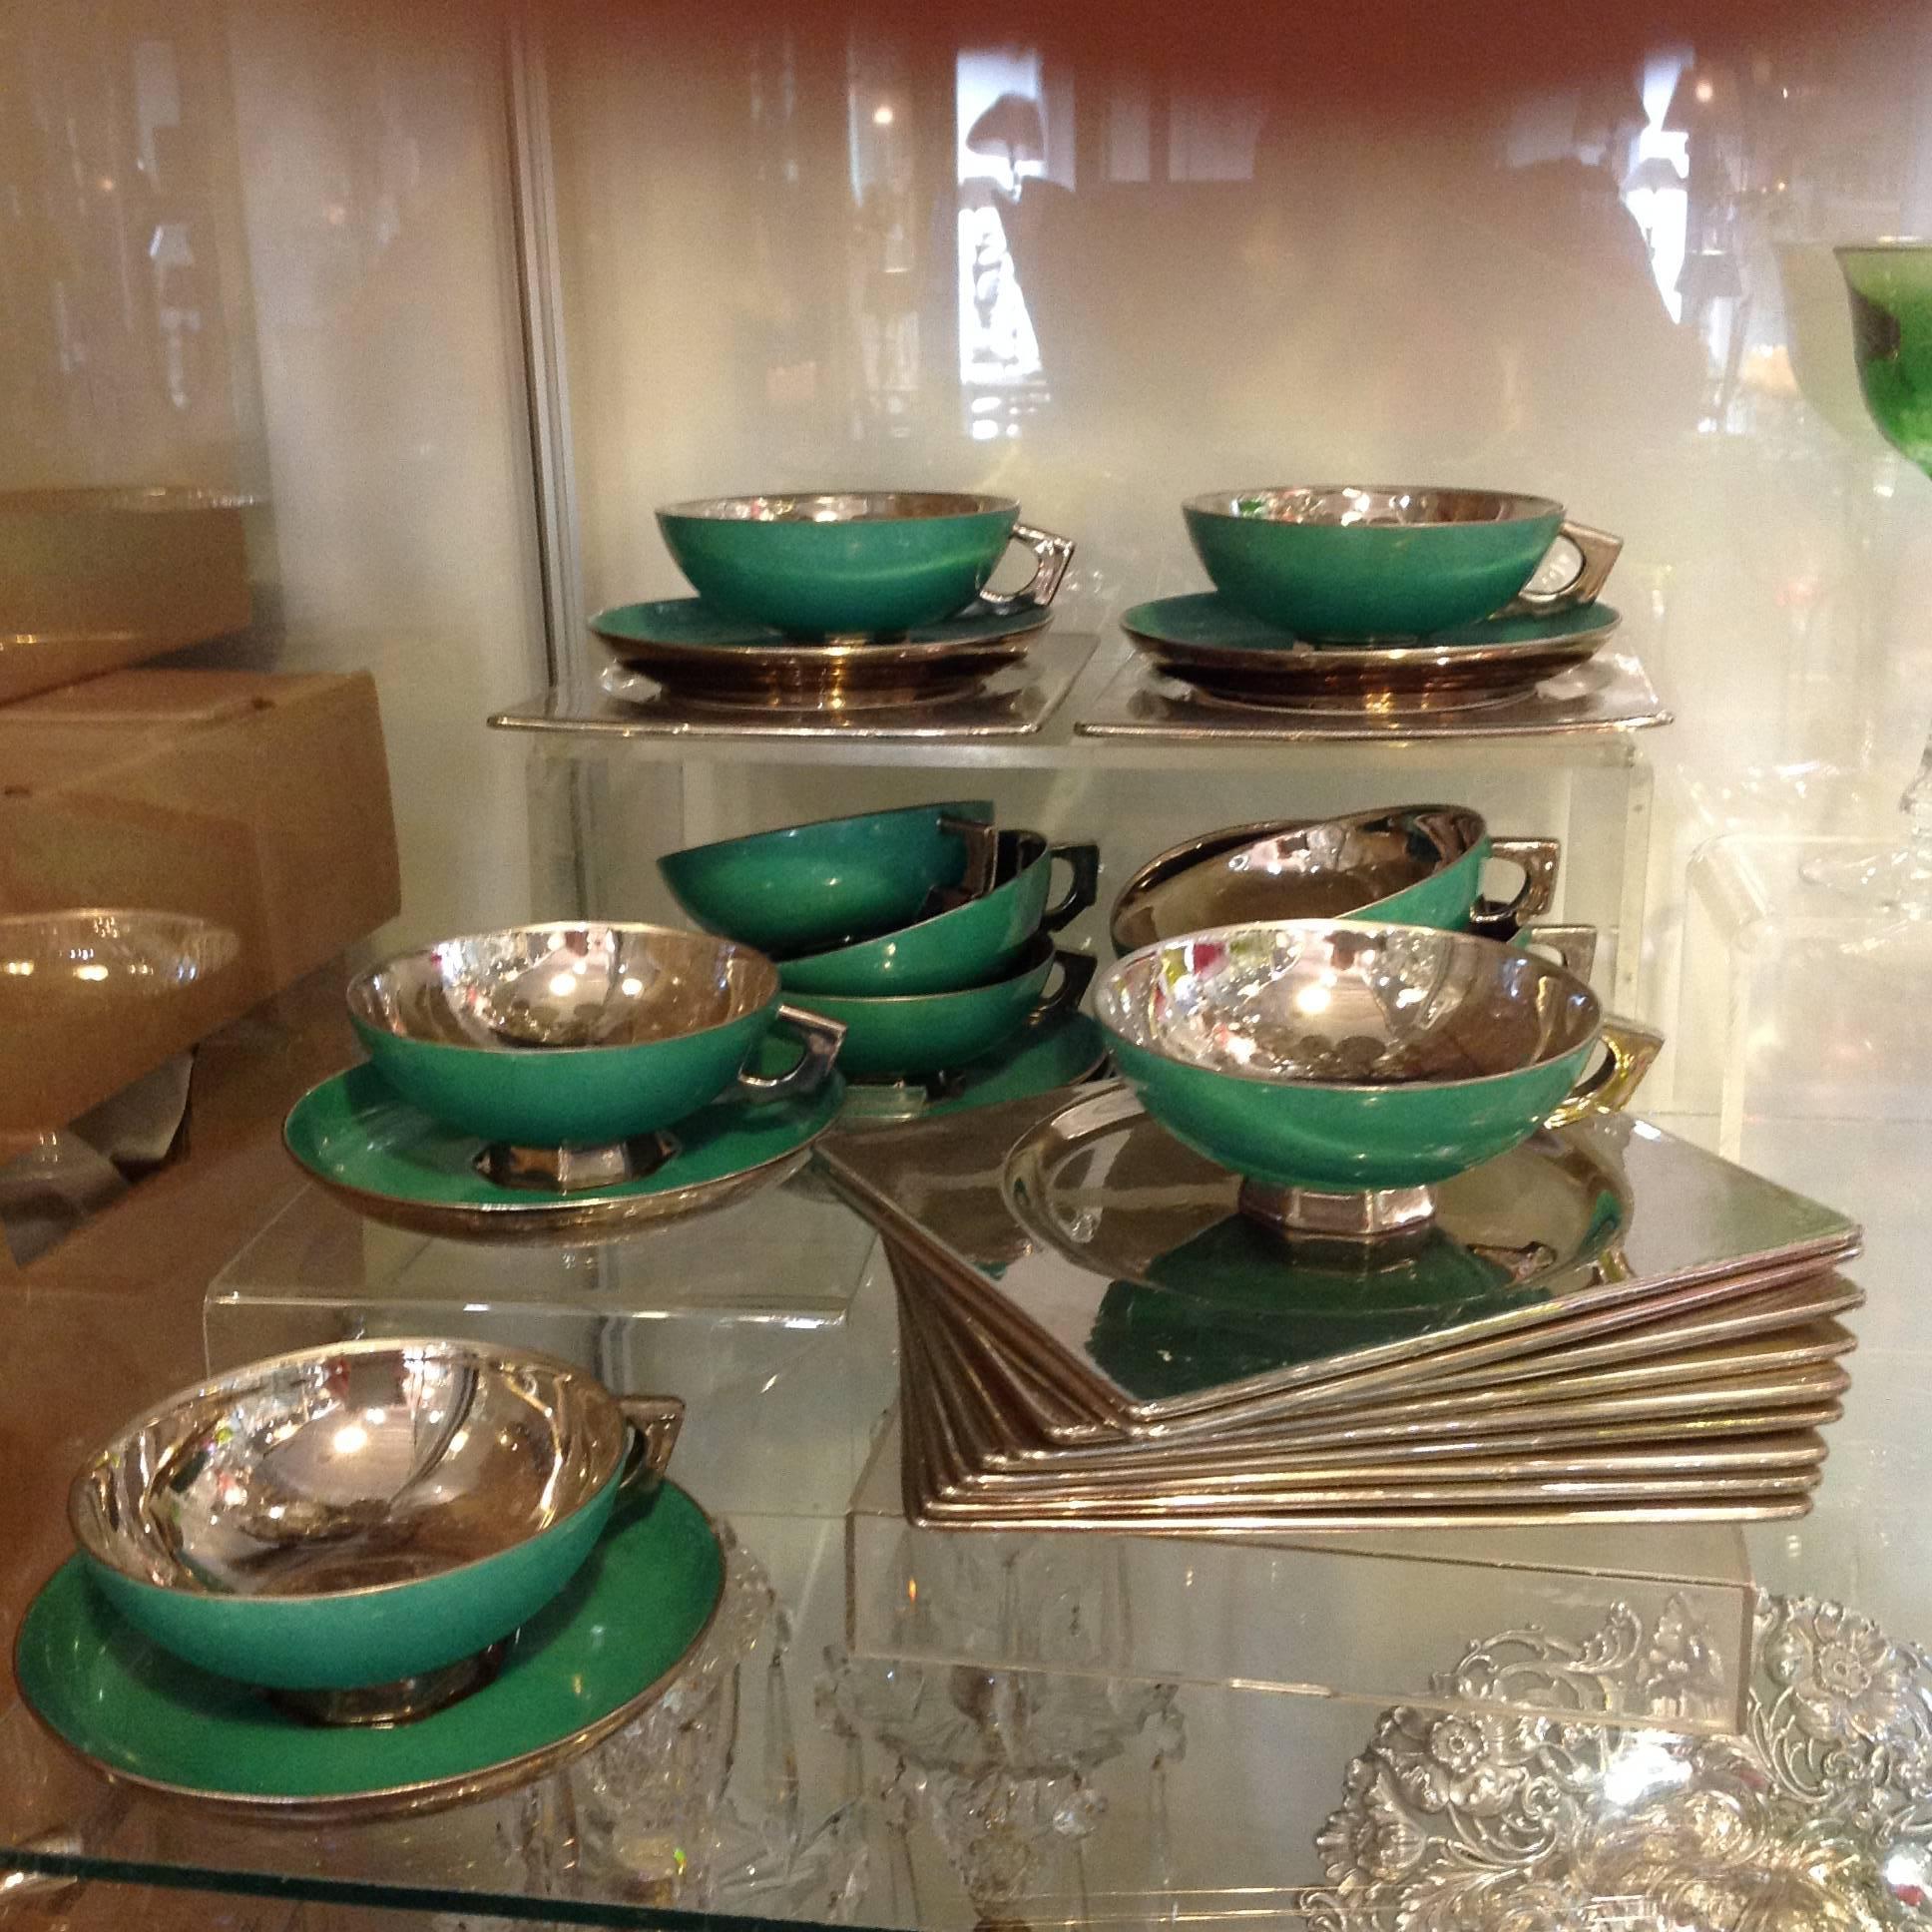 Rare Art Deco luncheon set in brilliant silver and jade green by Jean Luce, the important French ceramicist. It is designed for the pieces to nest. The set has a crème color ceramic base with a metallic silver finish and jade green on the cups and